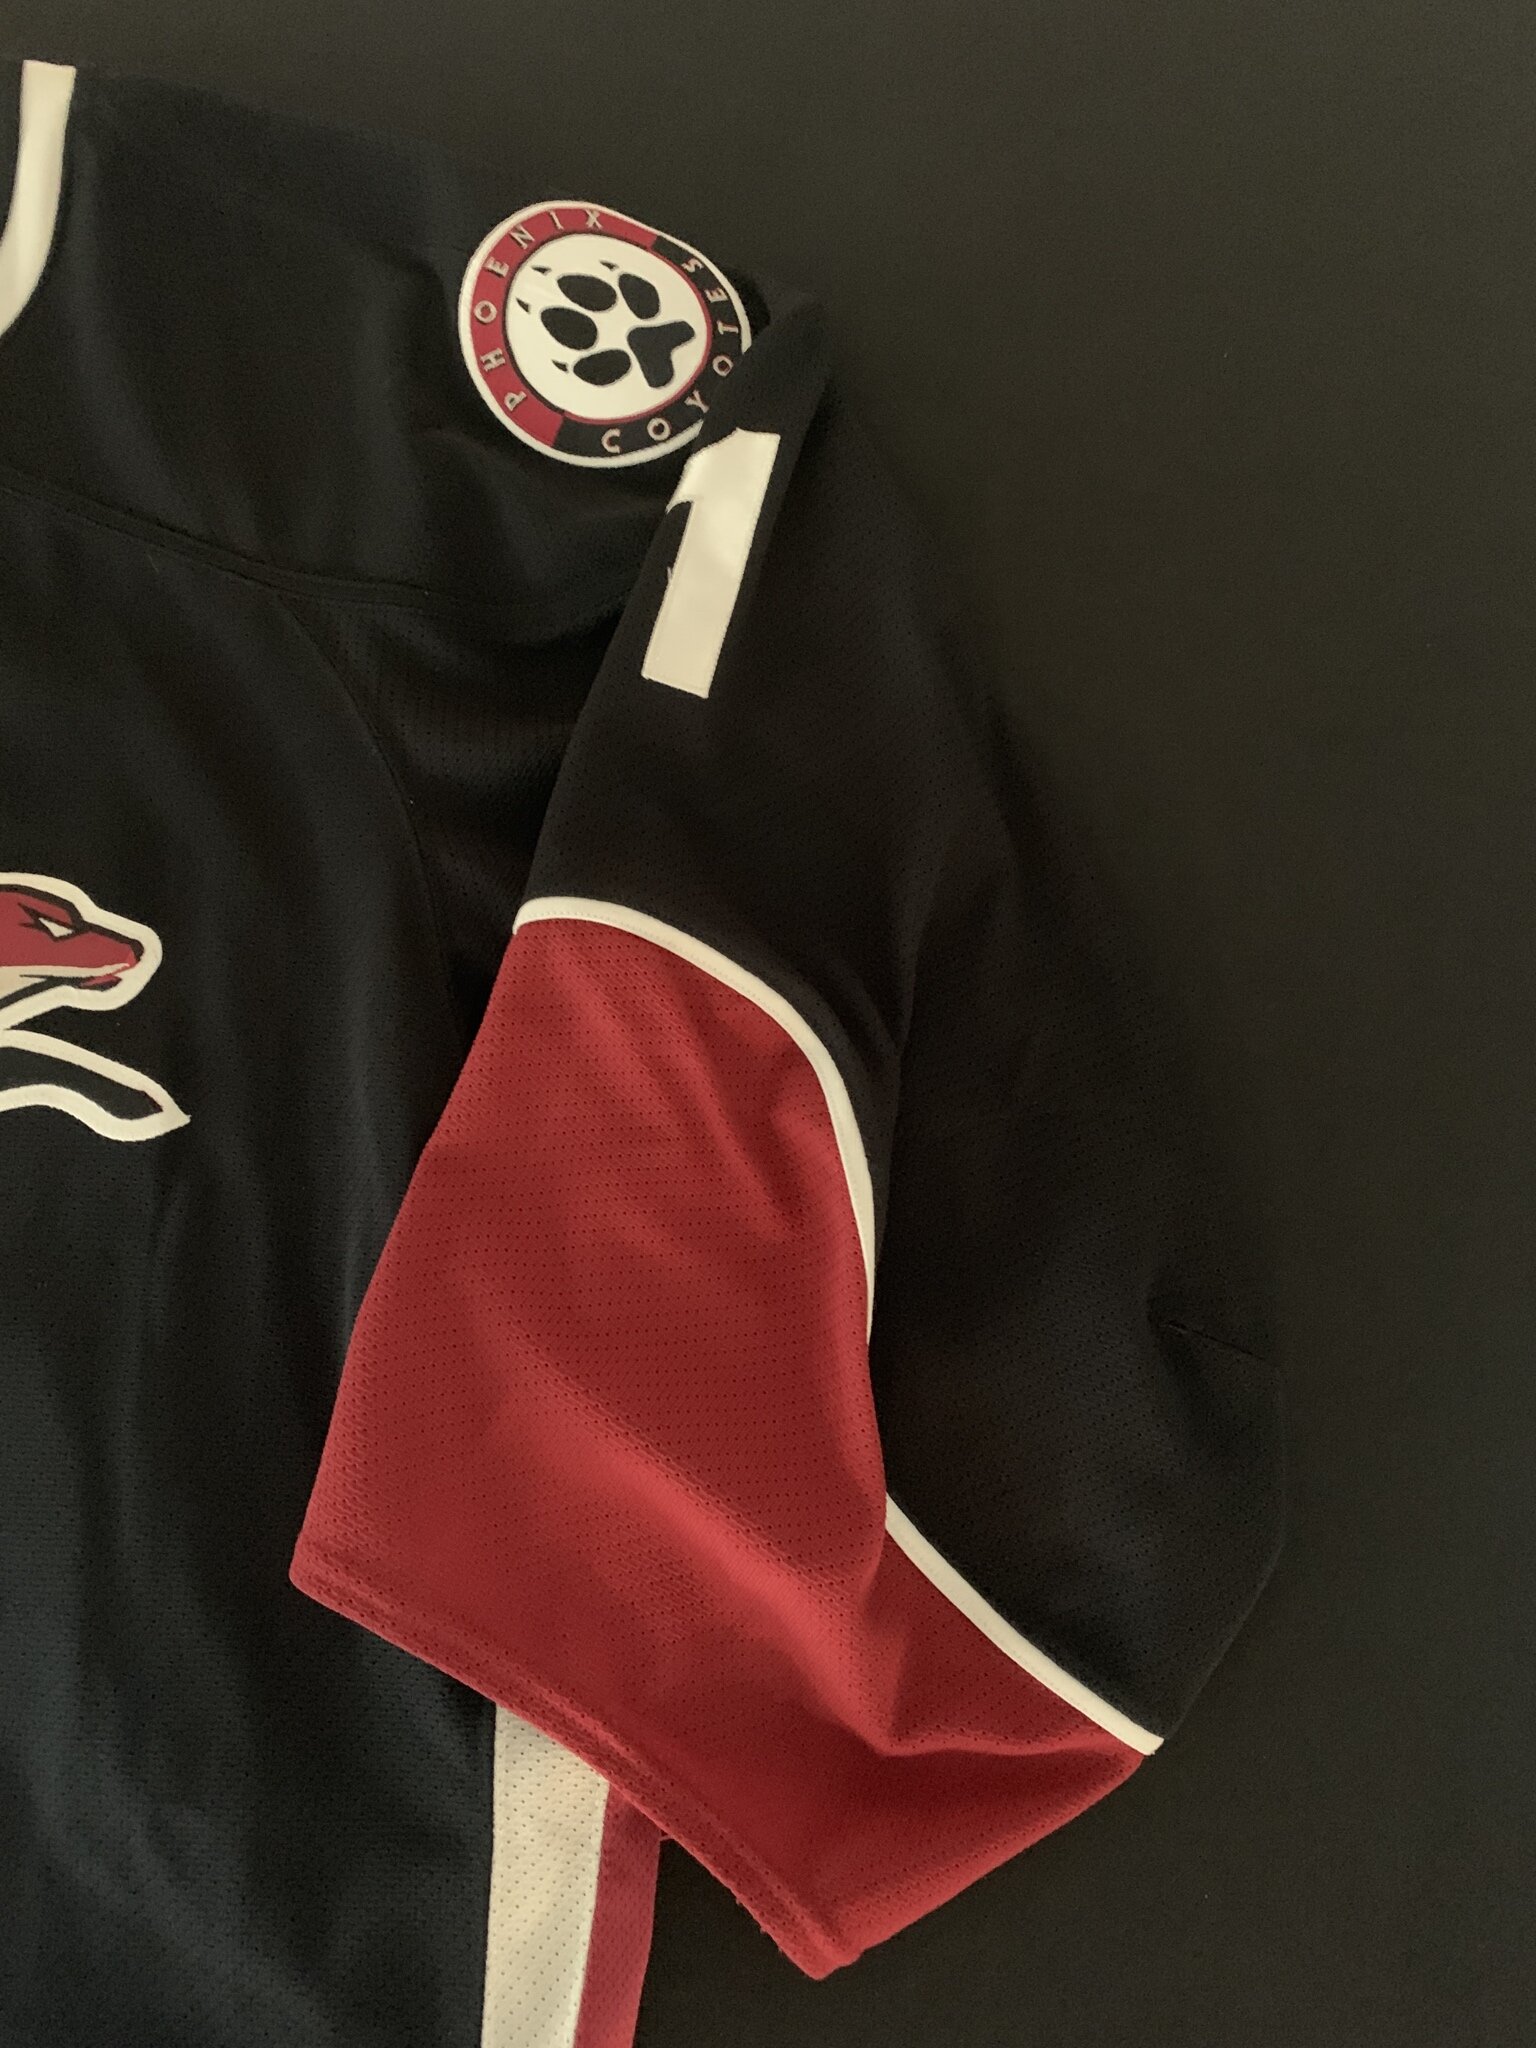 Mike Smith Coyotes — Game Worn Goalie Jerseys